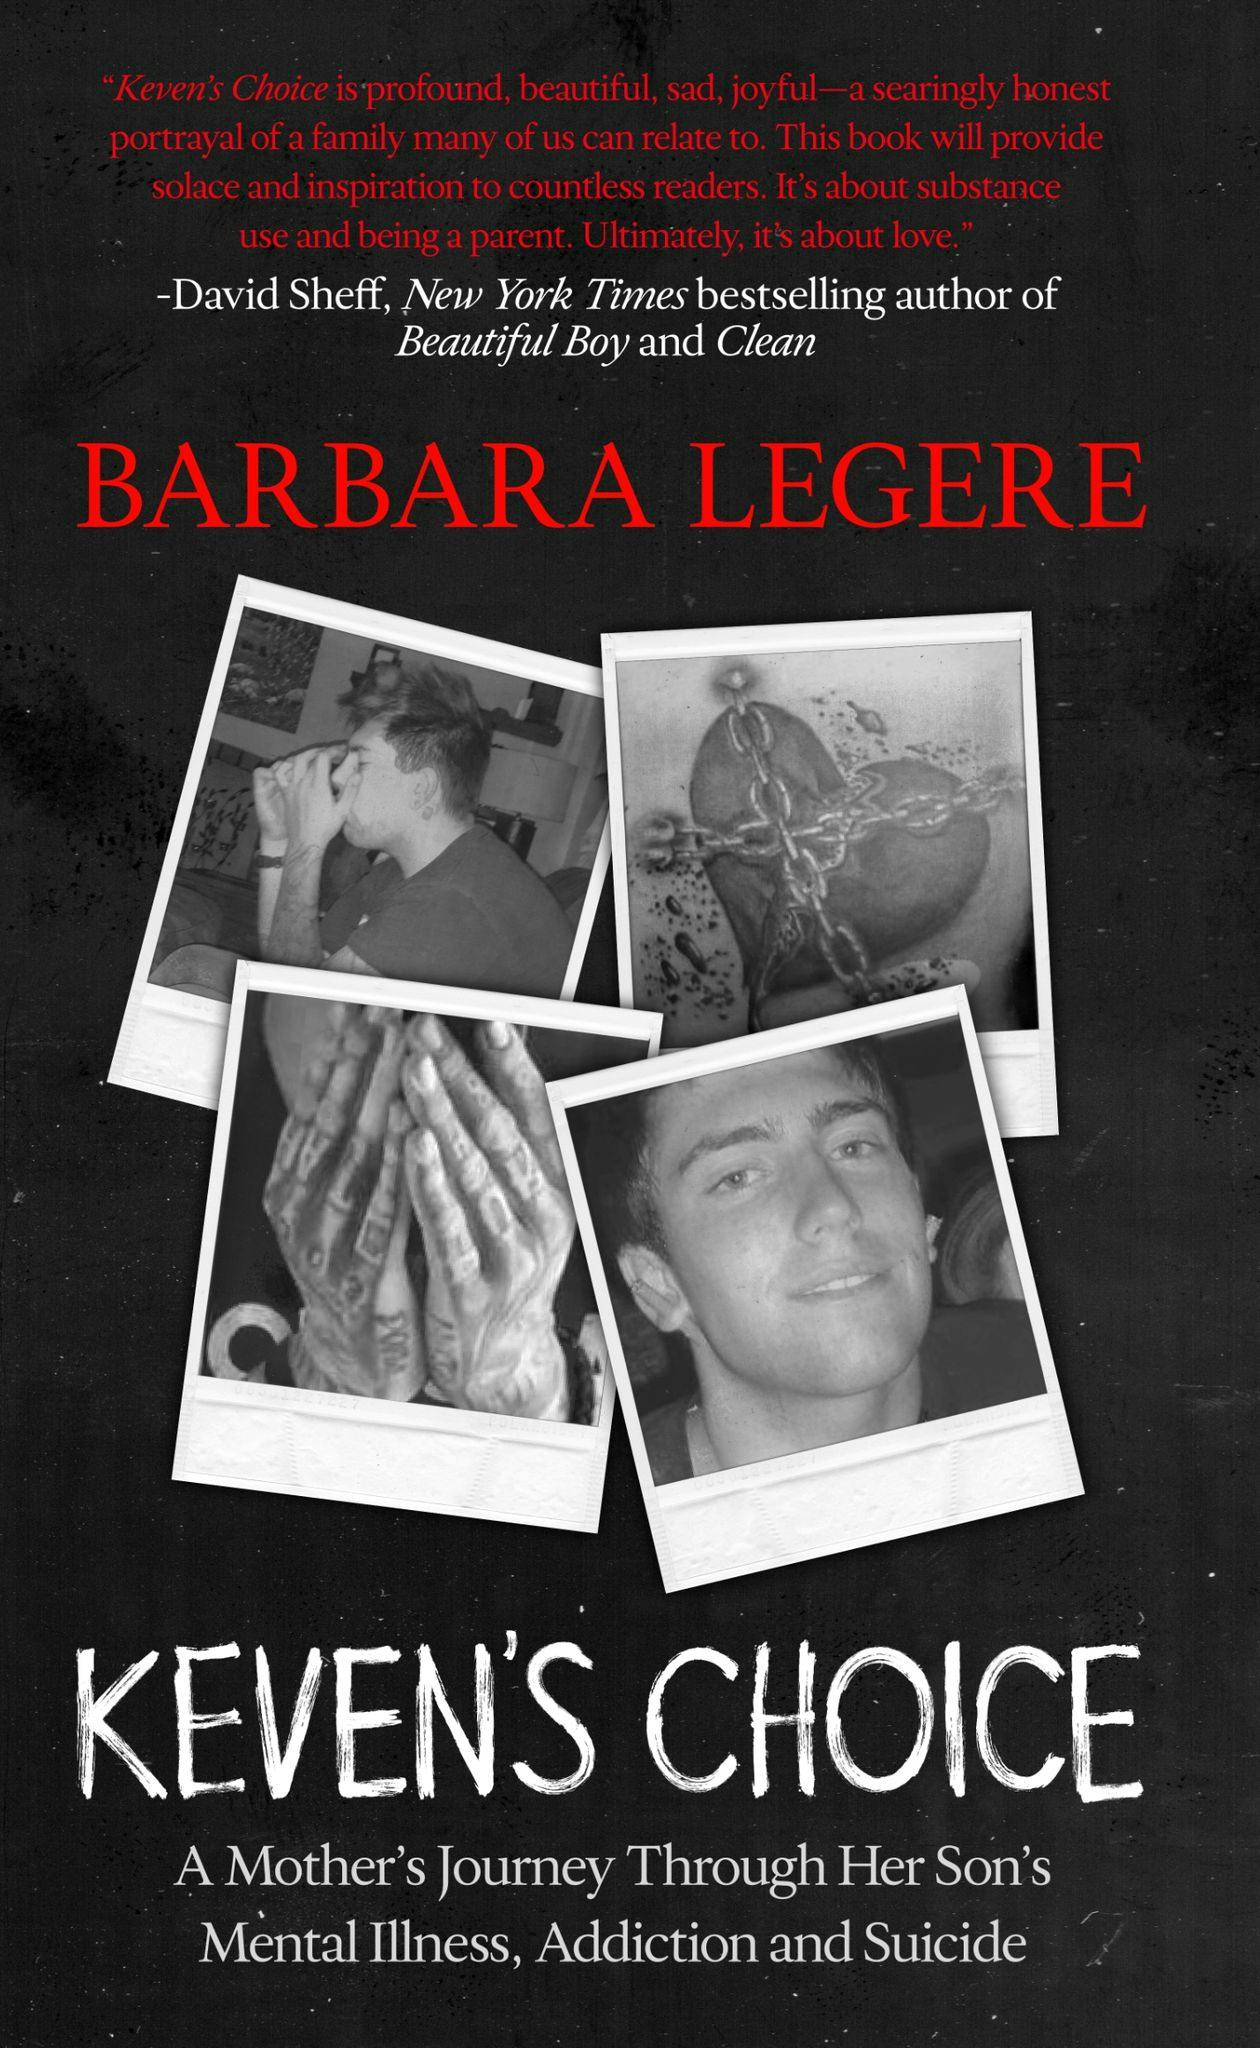 Barbara Legere - Bestselling Author, Grief Support Advocate, Springsteen fan, Mother